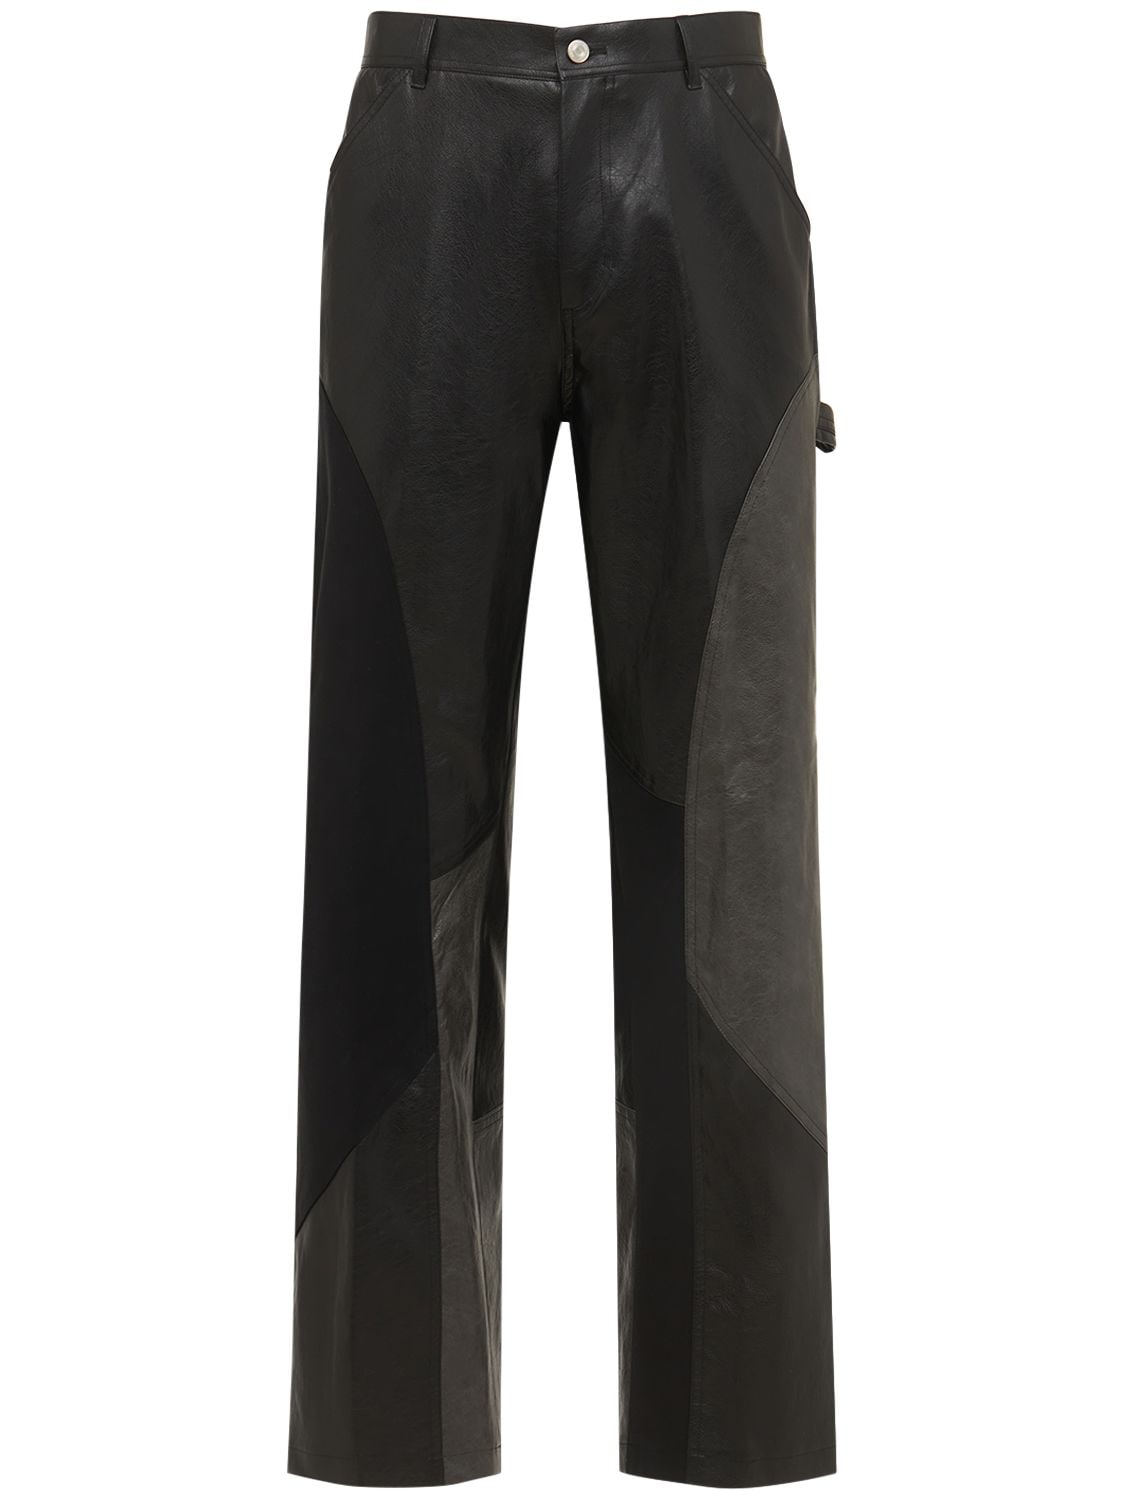 Patchwork Faux Leather Pants - ANDERSSON BELL - Modalova